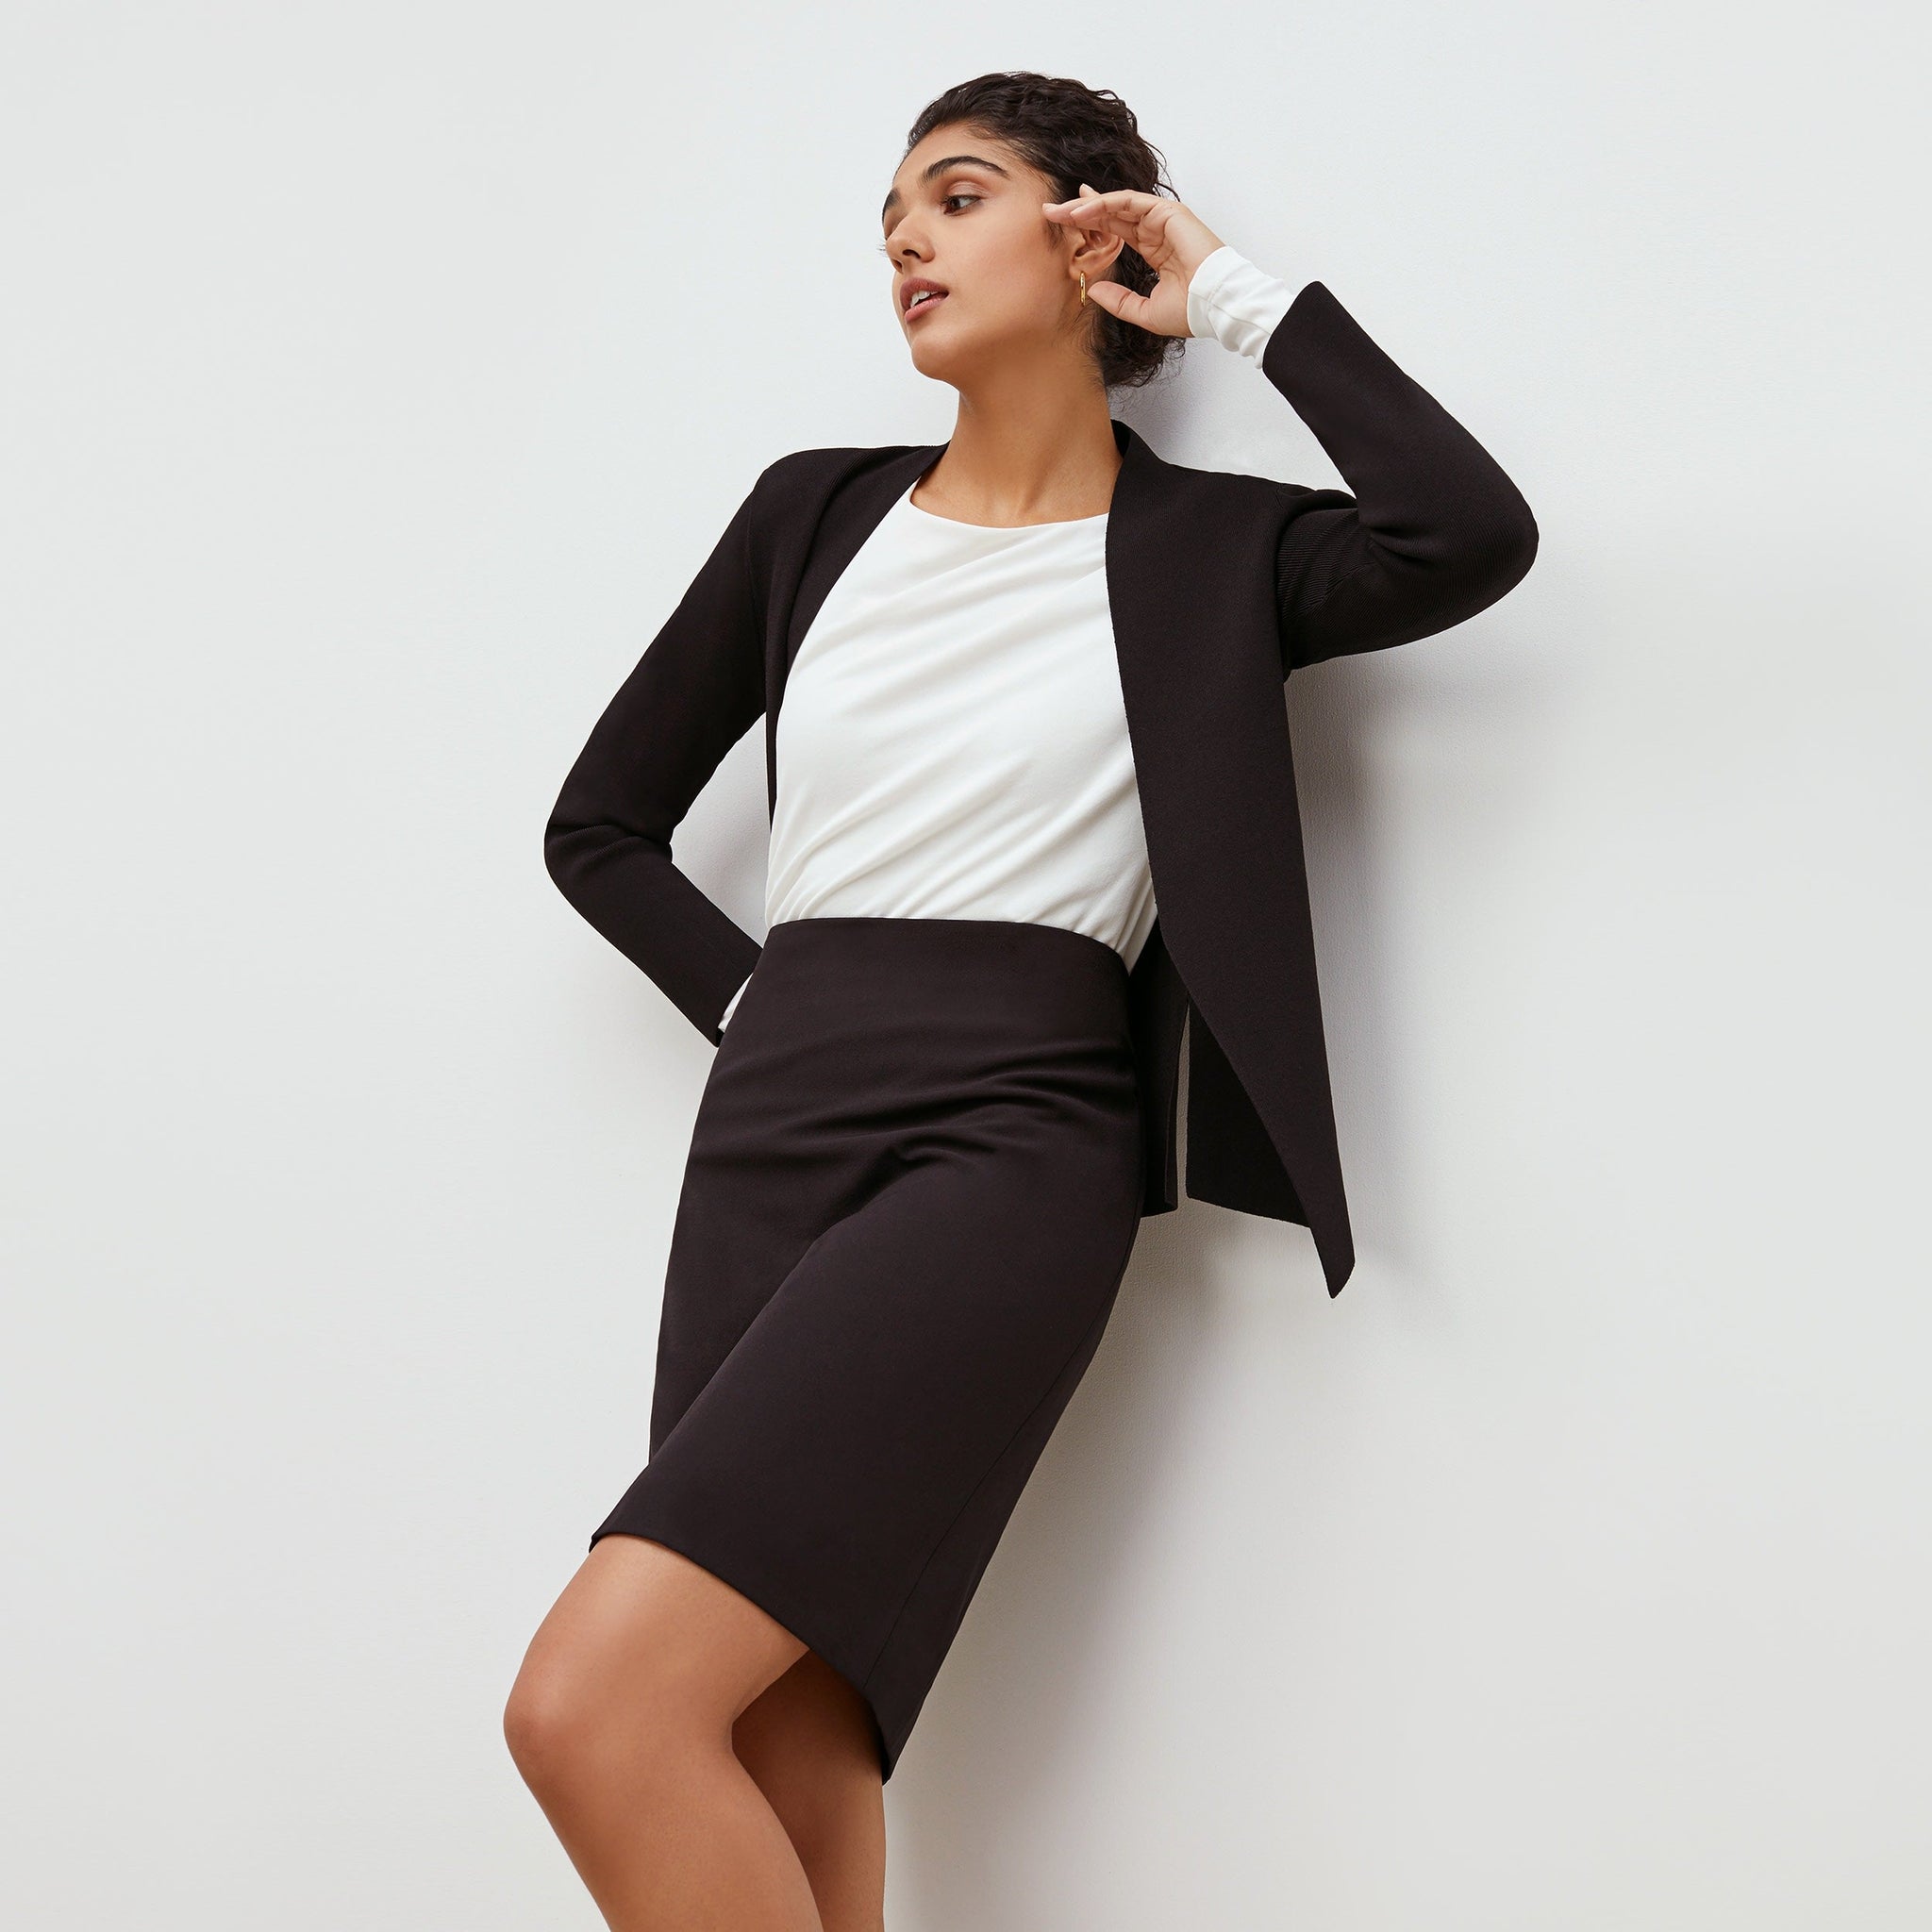 Front image of a woman standing wearing the Noho skirt in black.